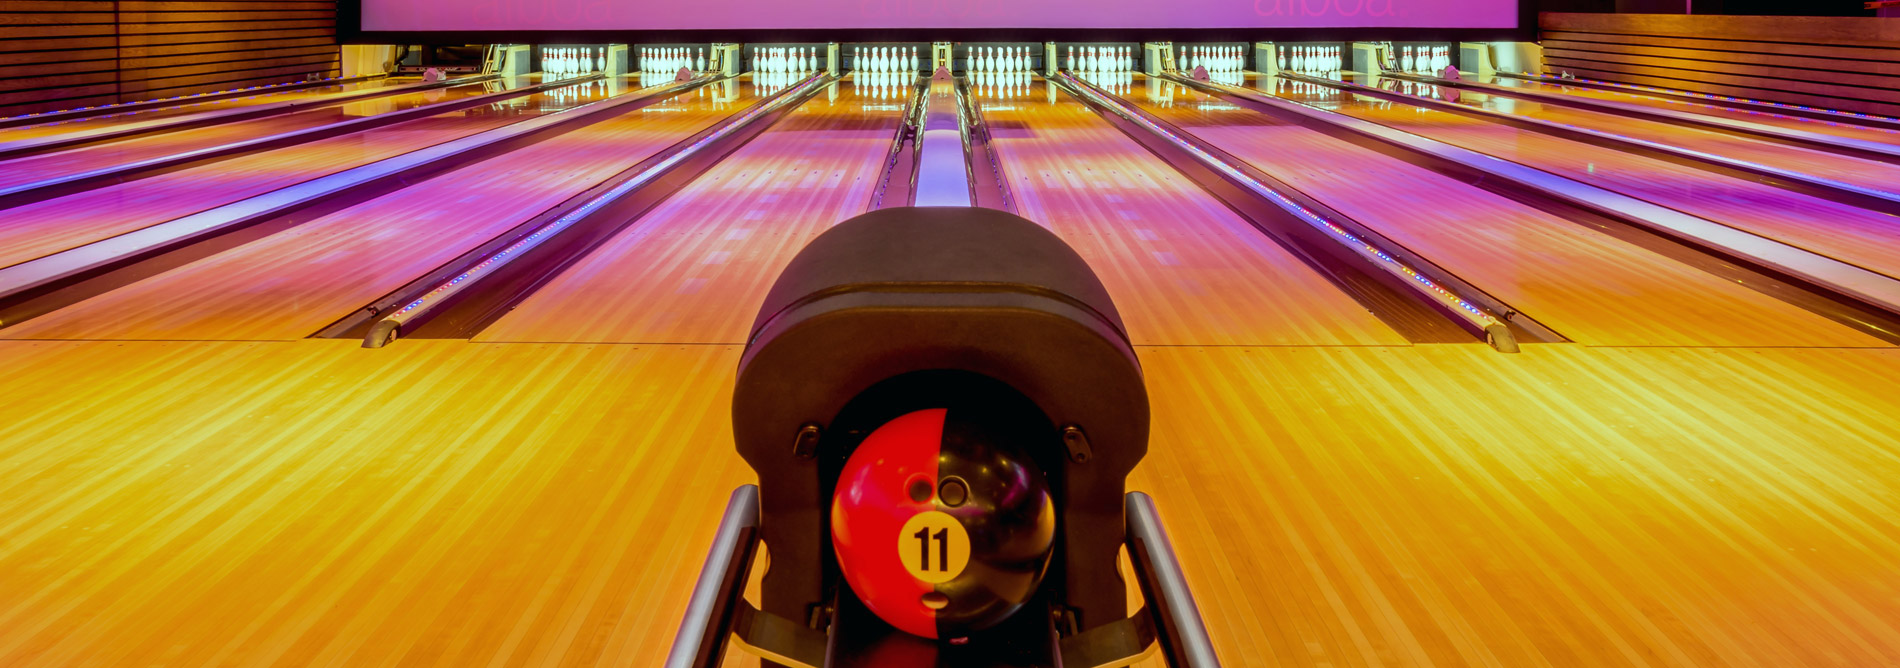 Bowling-QubicaAMF-lanes-product-banner.jpg